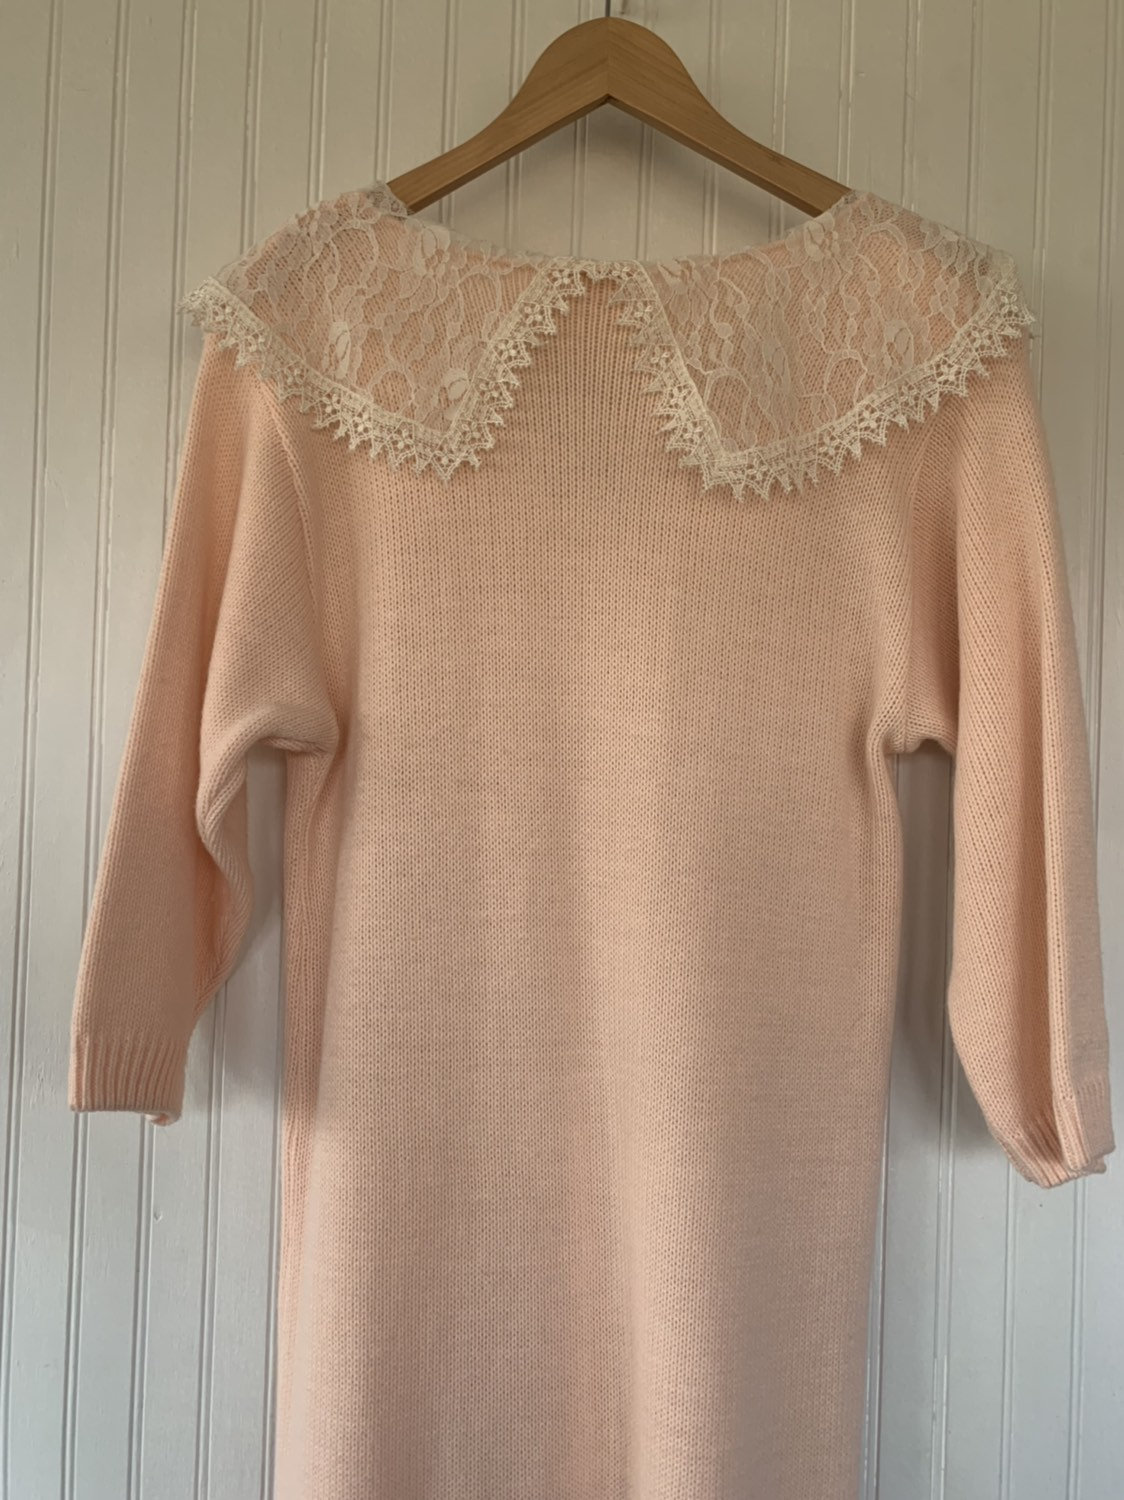 Vintage 80s 90s Pretty in Pink Sweater Dress Medium Lace Collar Bow Tie ...